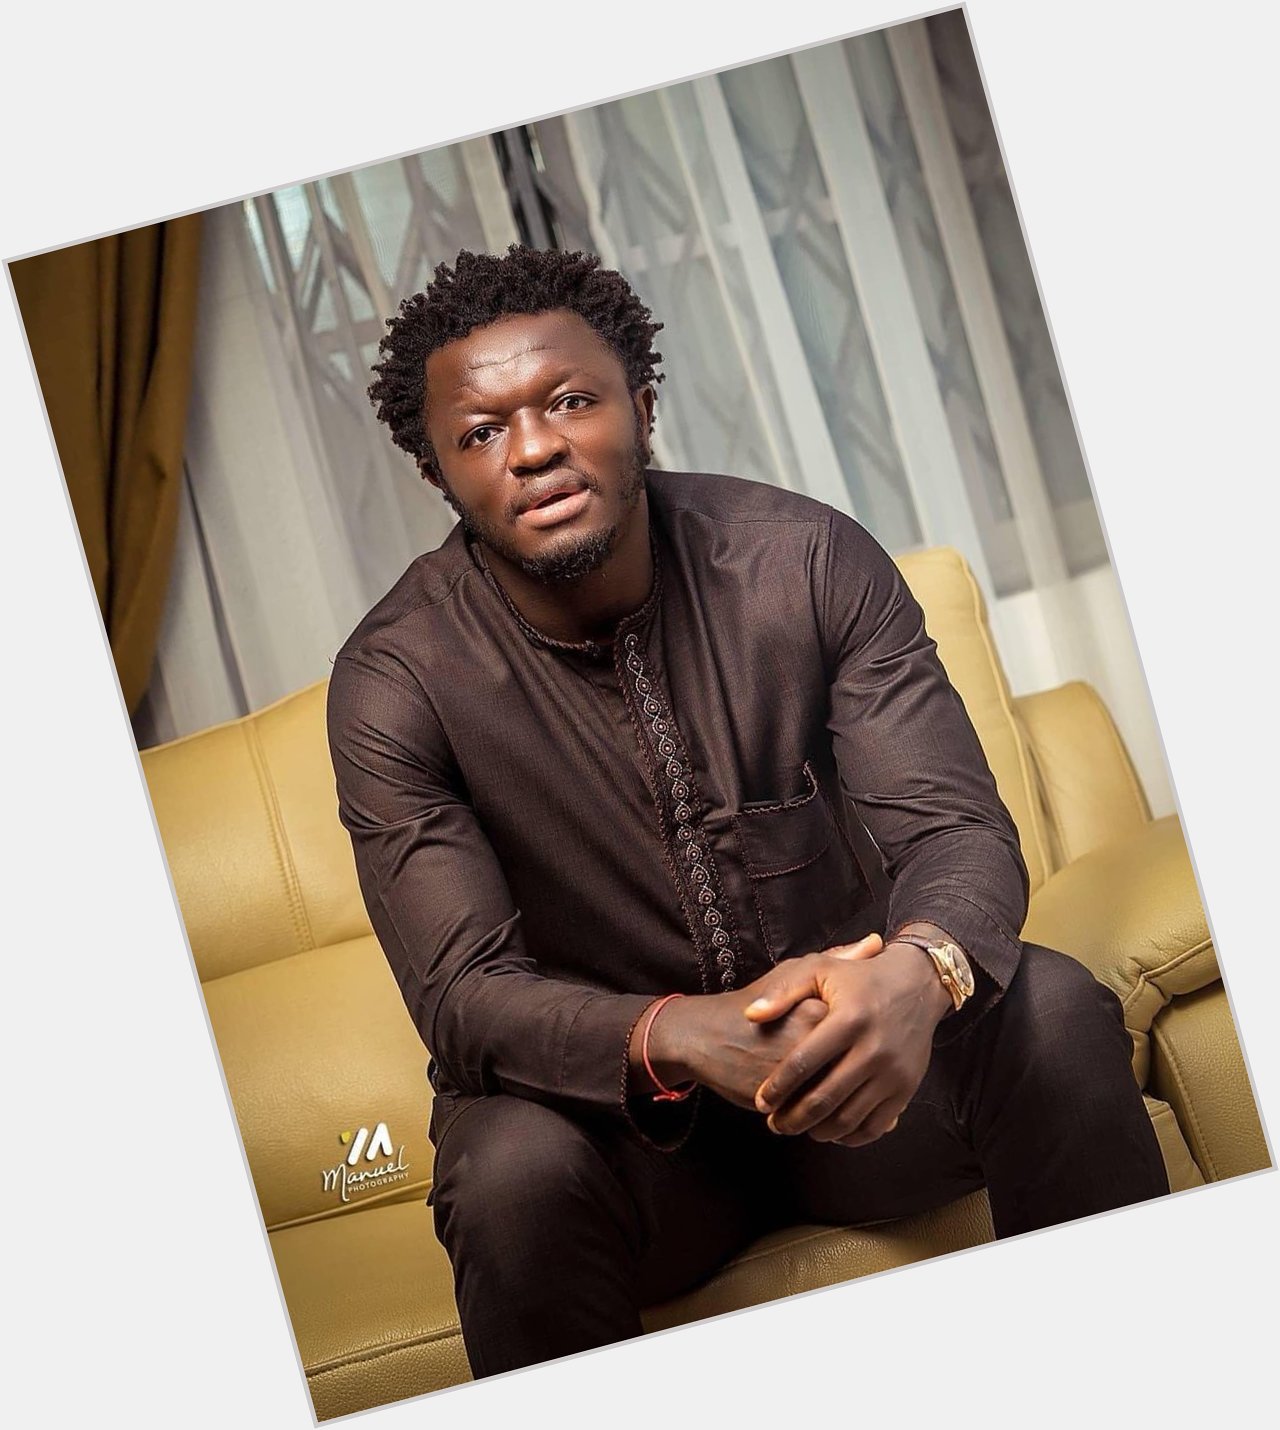 Happy birthday to the midfield general, Sulley Muntari   Age with grace Legend! 
Missing you like   . 